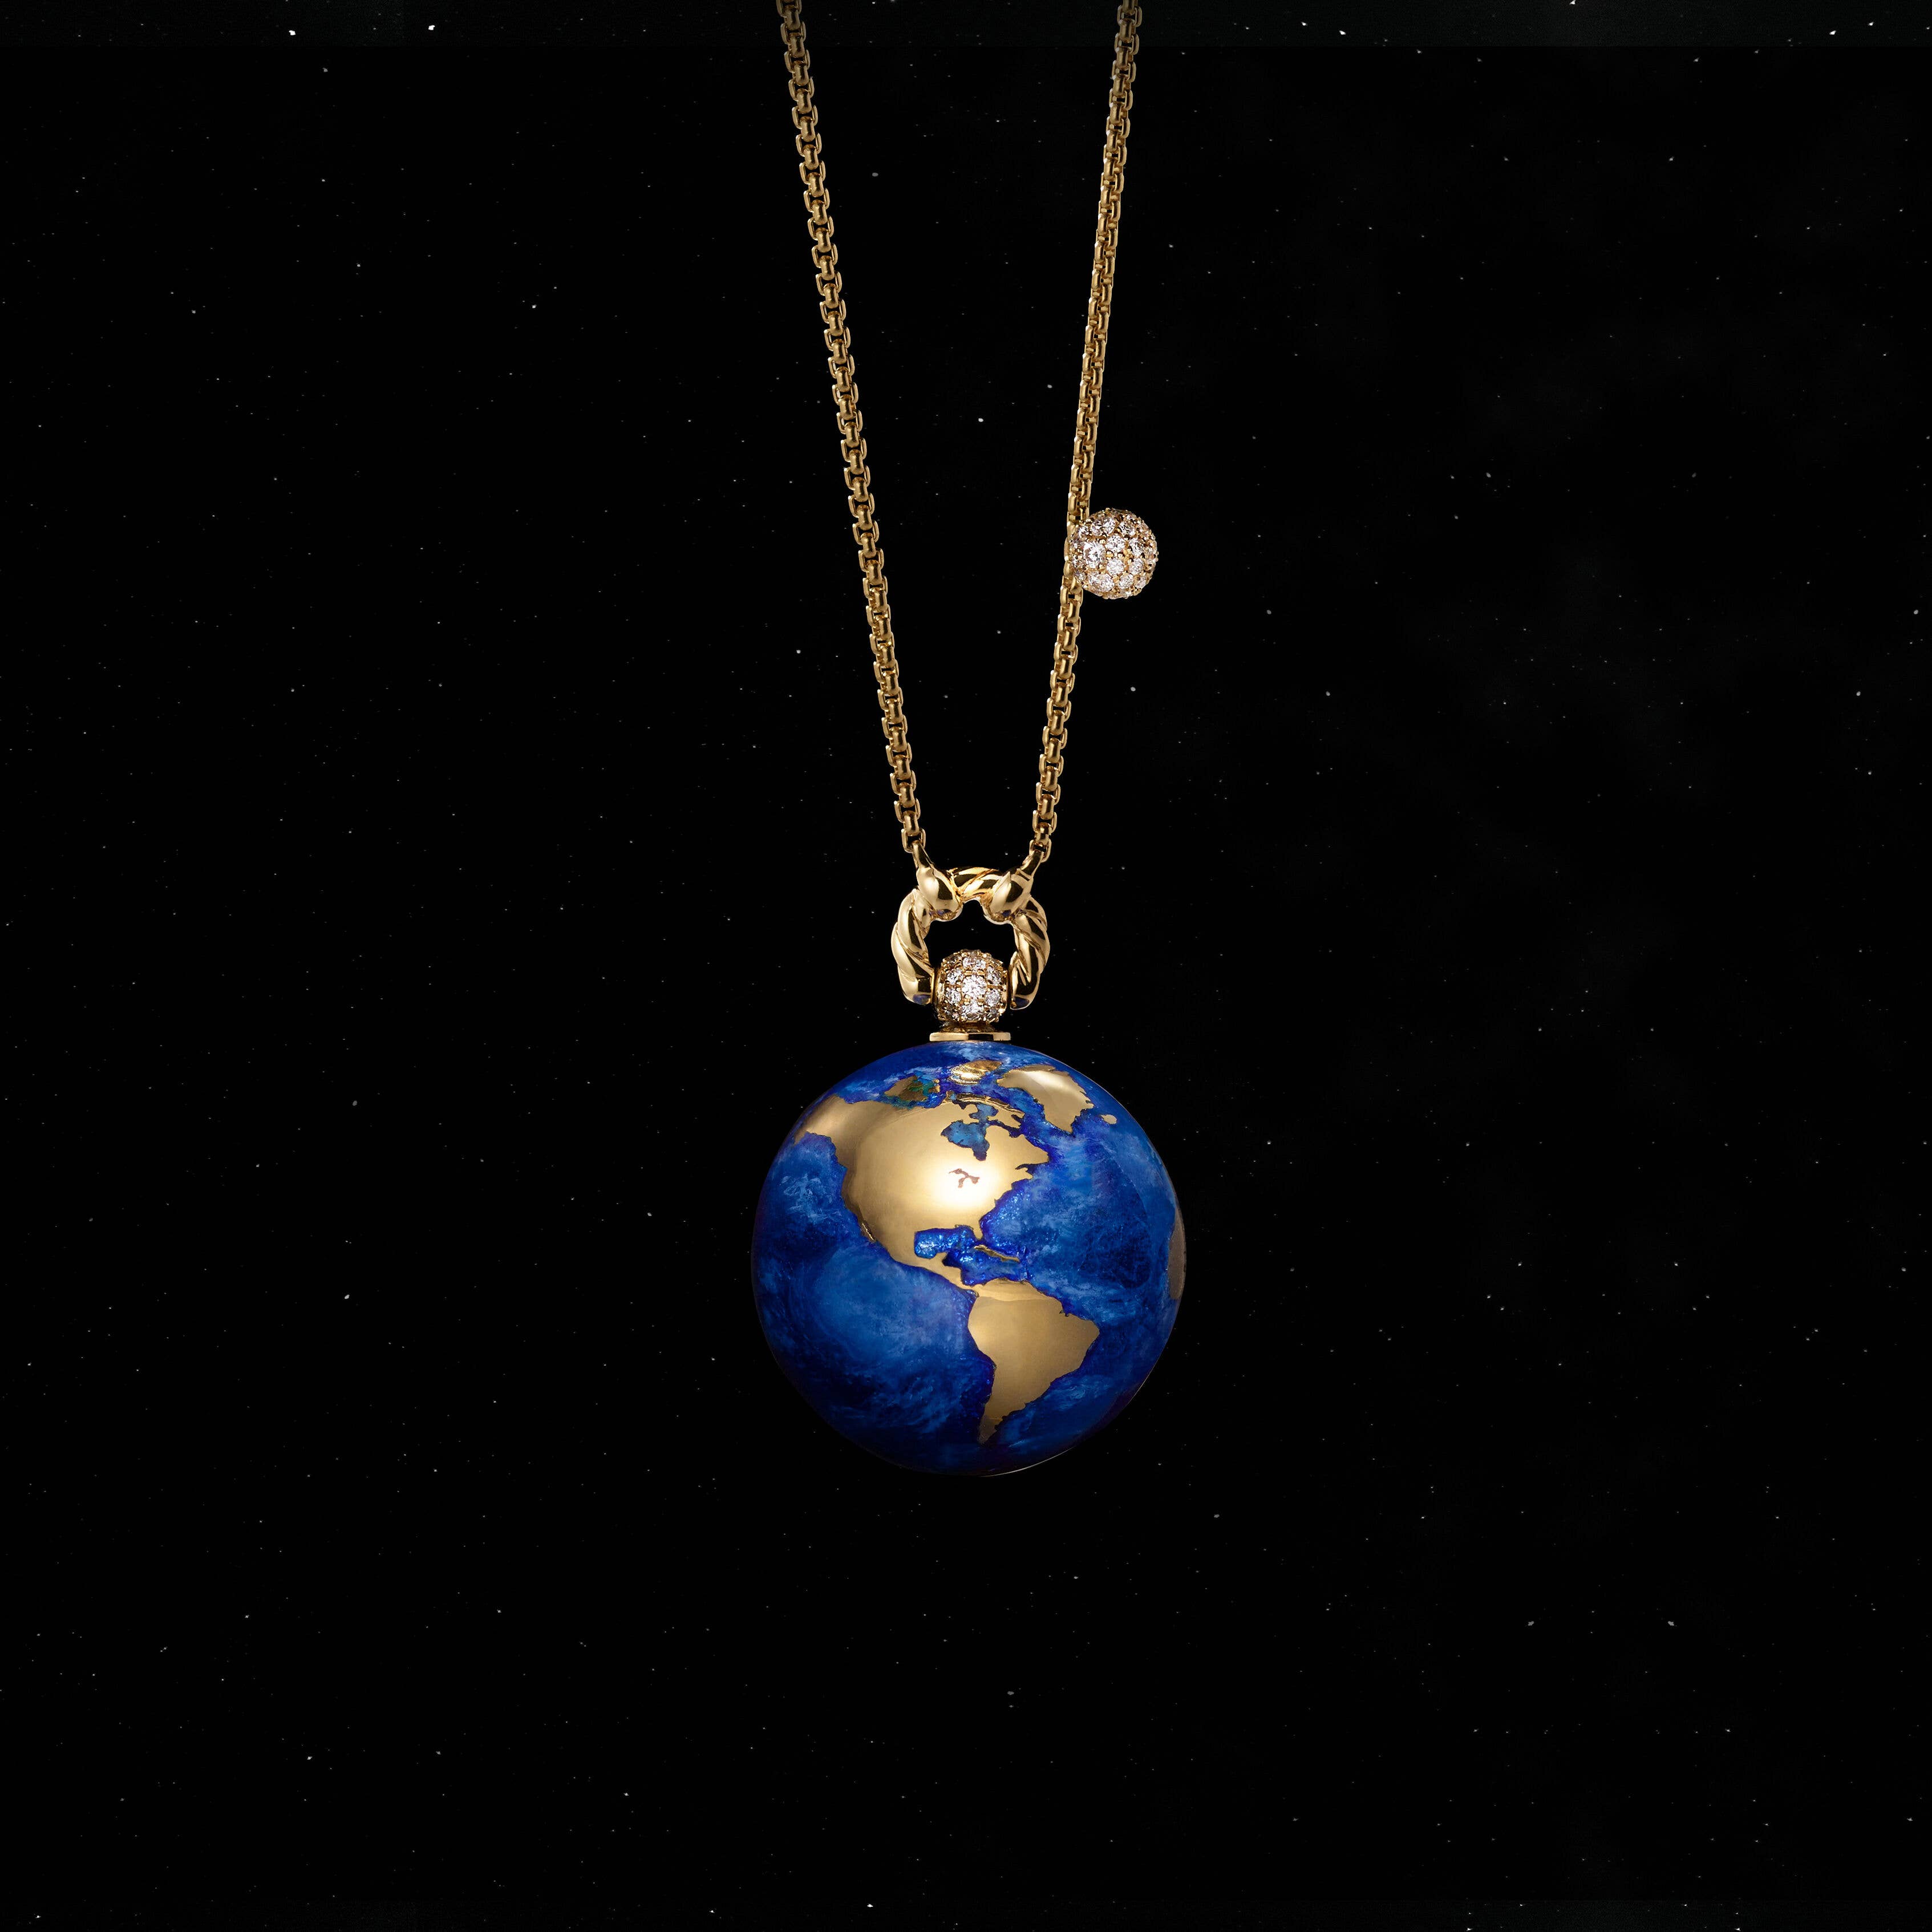 Solari Earth Pendant Necklace in 18K Yellow Gold with Blue Enamel and Pavé Diamonds